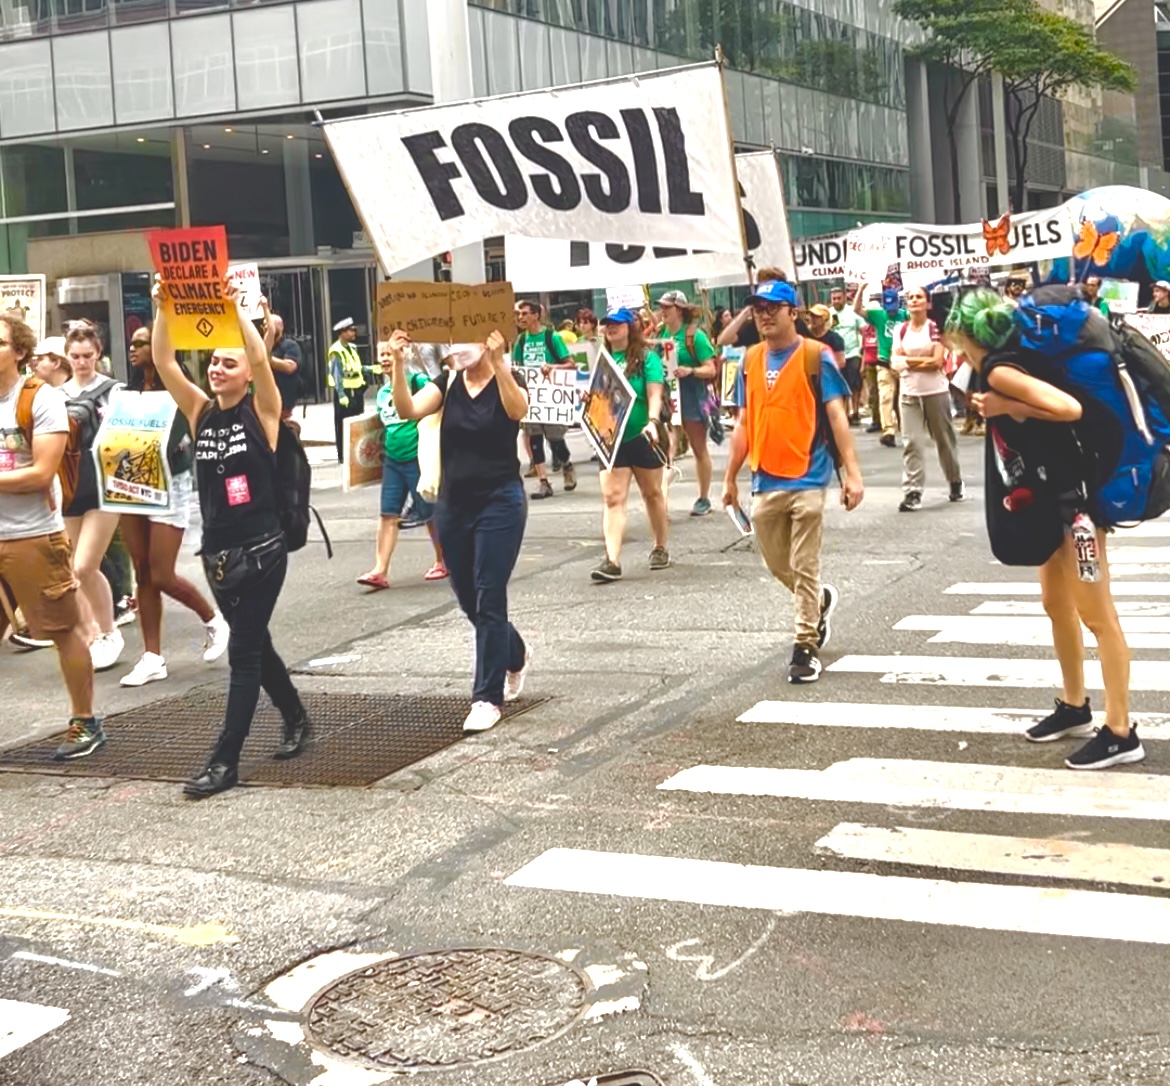 Climate+March+brings+people+from+diverse+communities+to+NYC